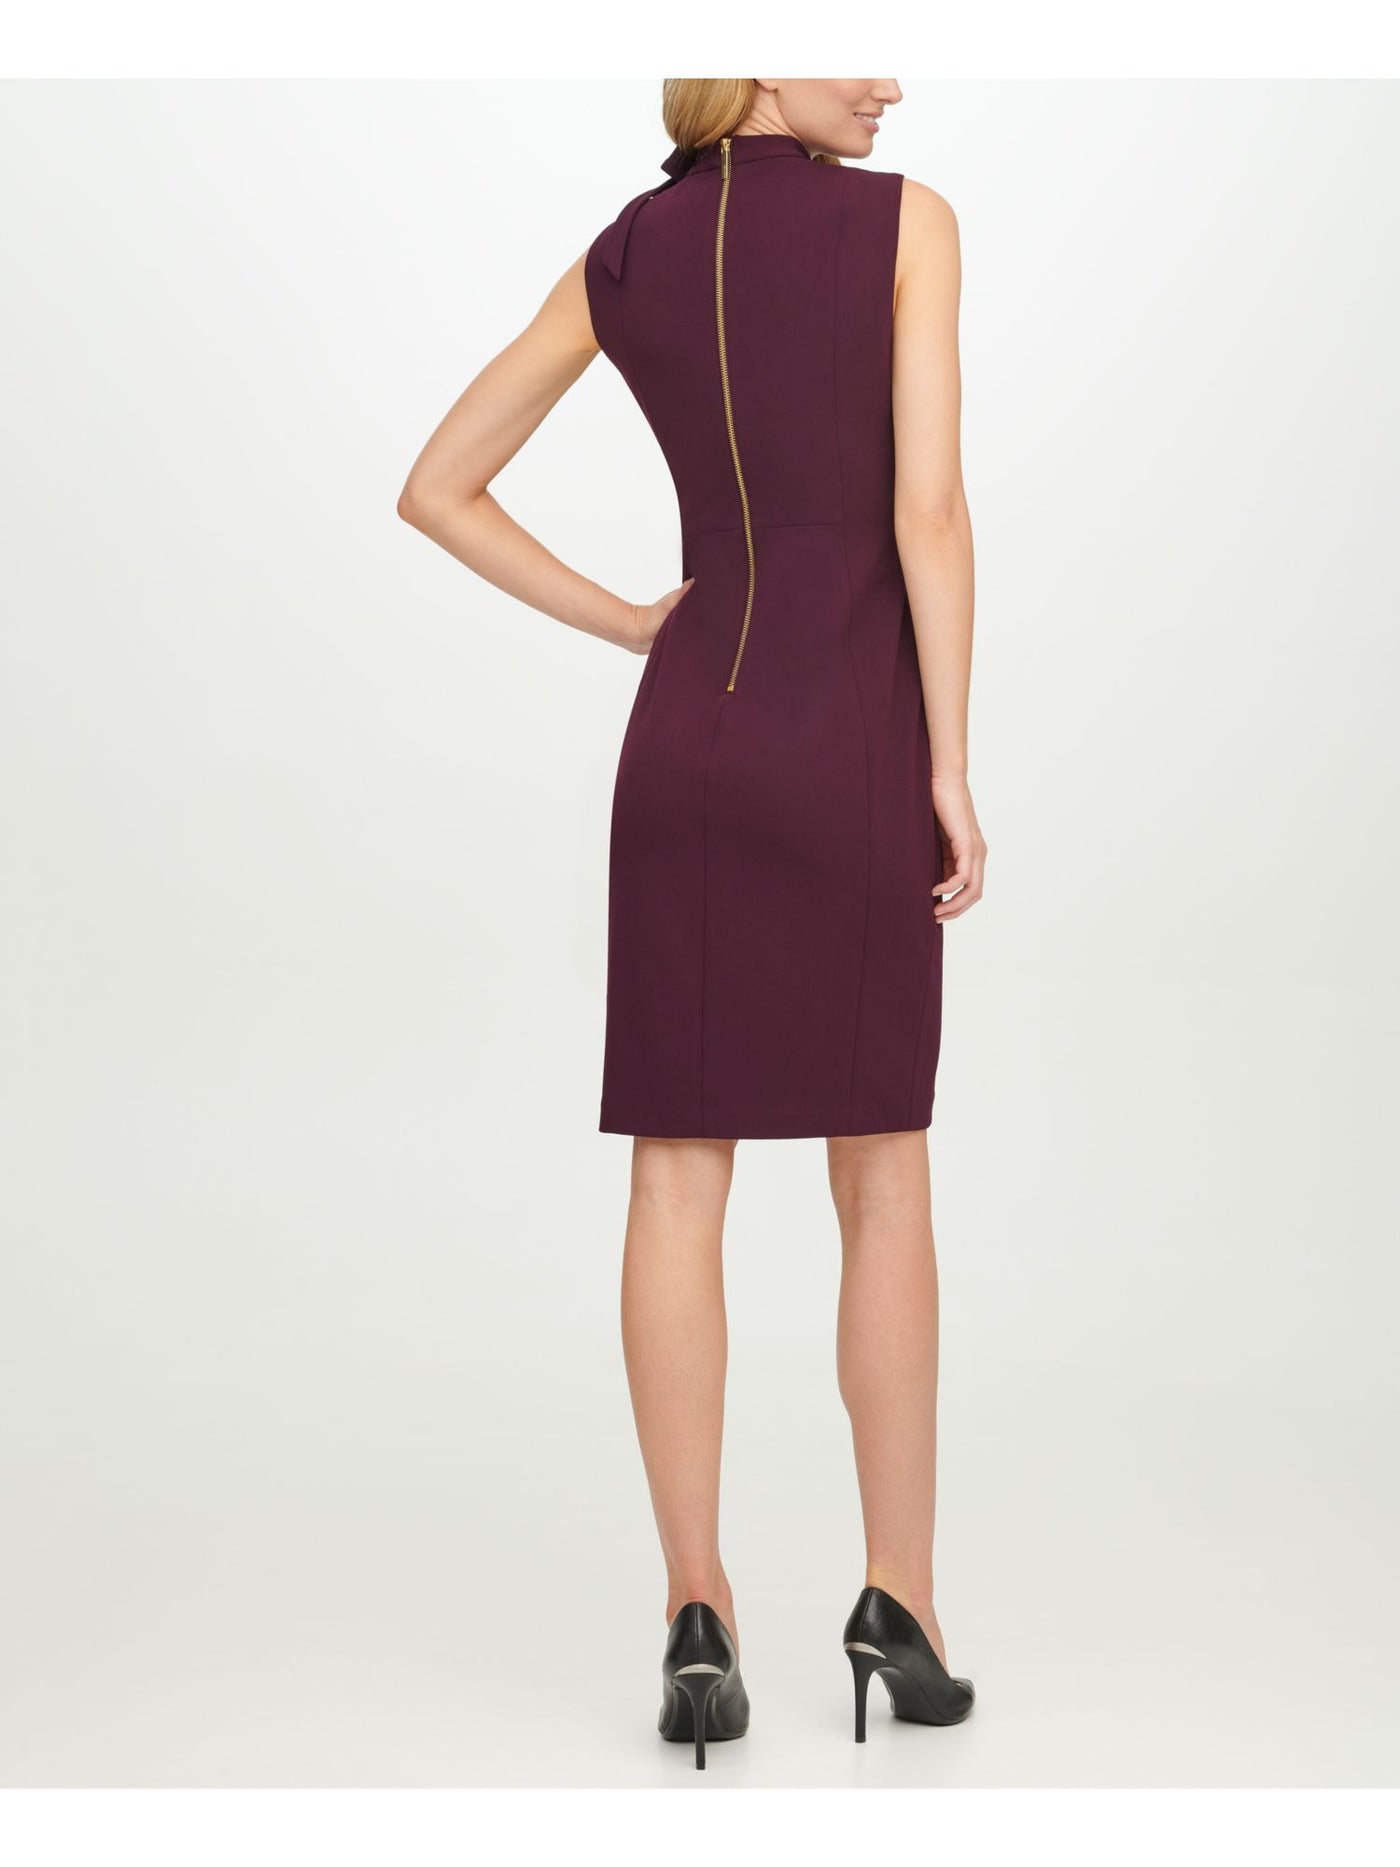 CALVIN KLEIN Womens Purple Zippered Unlined Bow Detail Sleeveless Round Neck Above The Knee Cocktail Sheath Dress 12